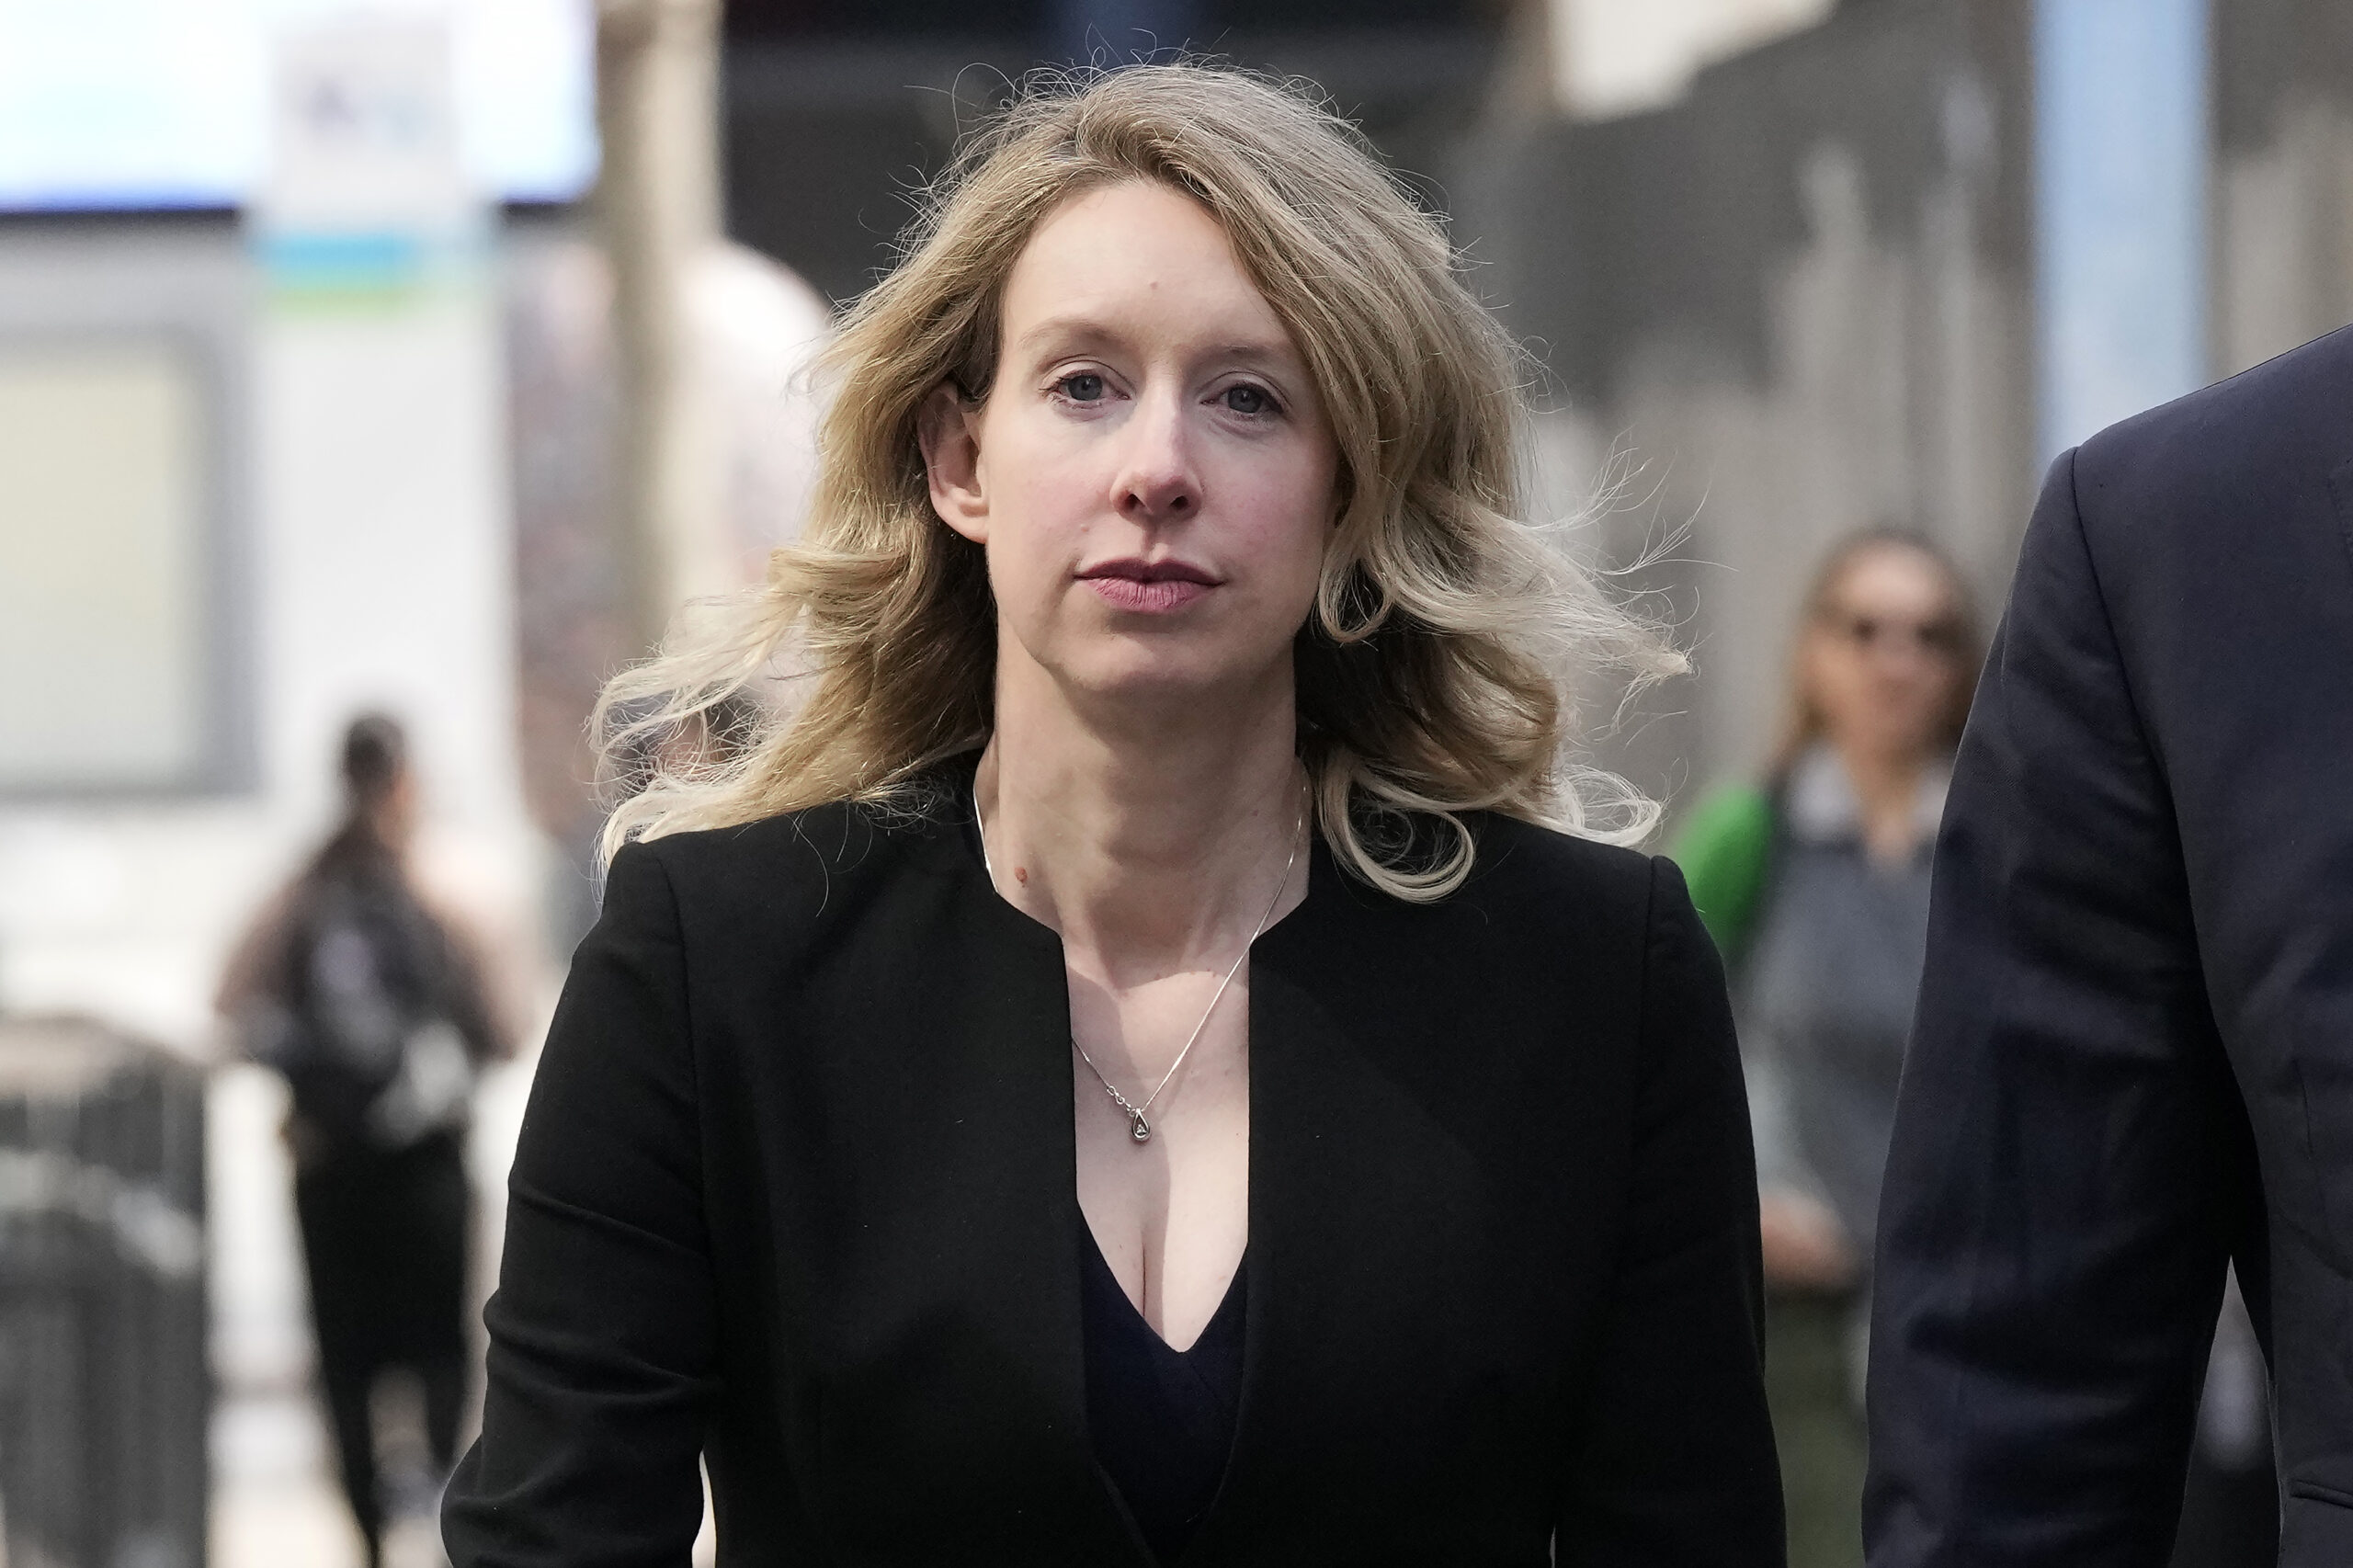 Former Theranos CEO Elizabeth Holmes leaves federal court in San Jose, Calif. on March 17, 2023. (AP)